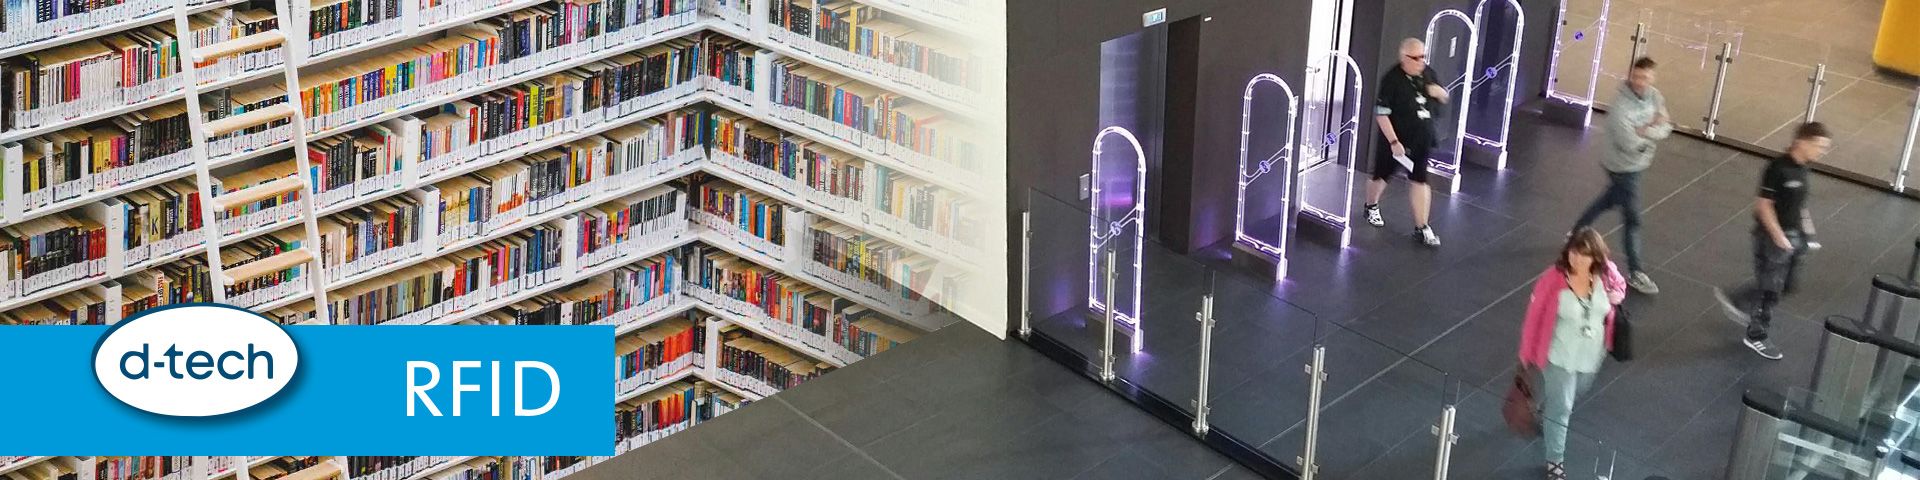 RFID solutions for Library inventory, self-service and security